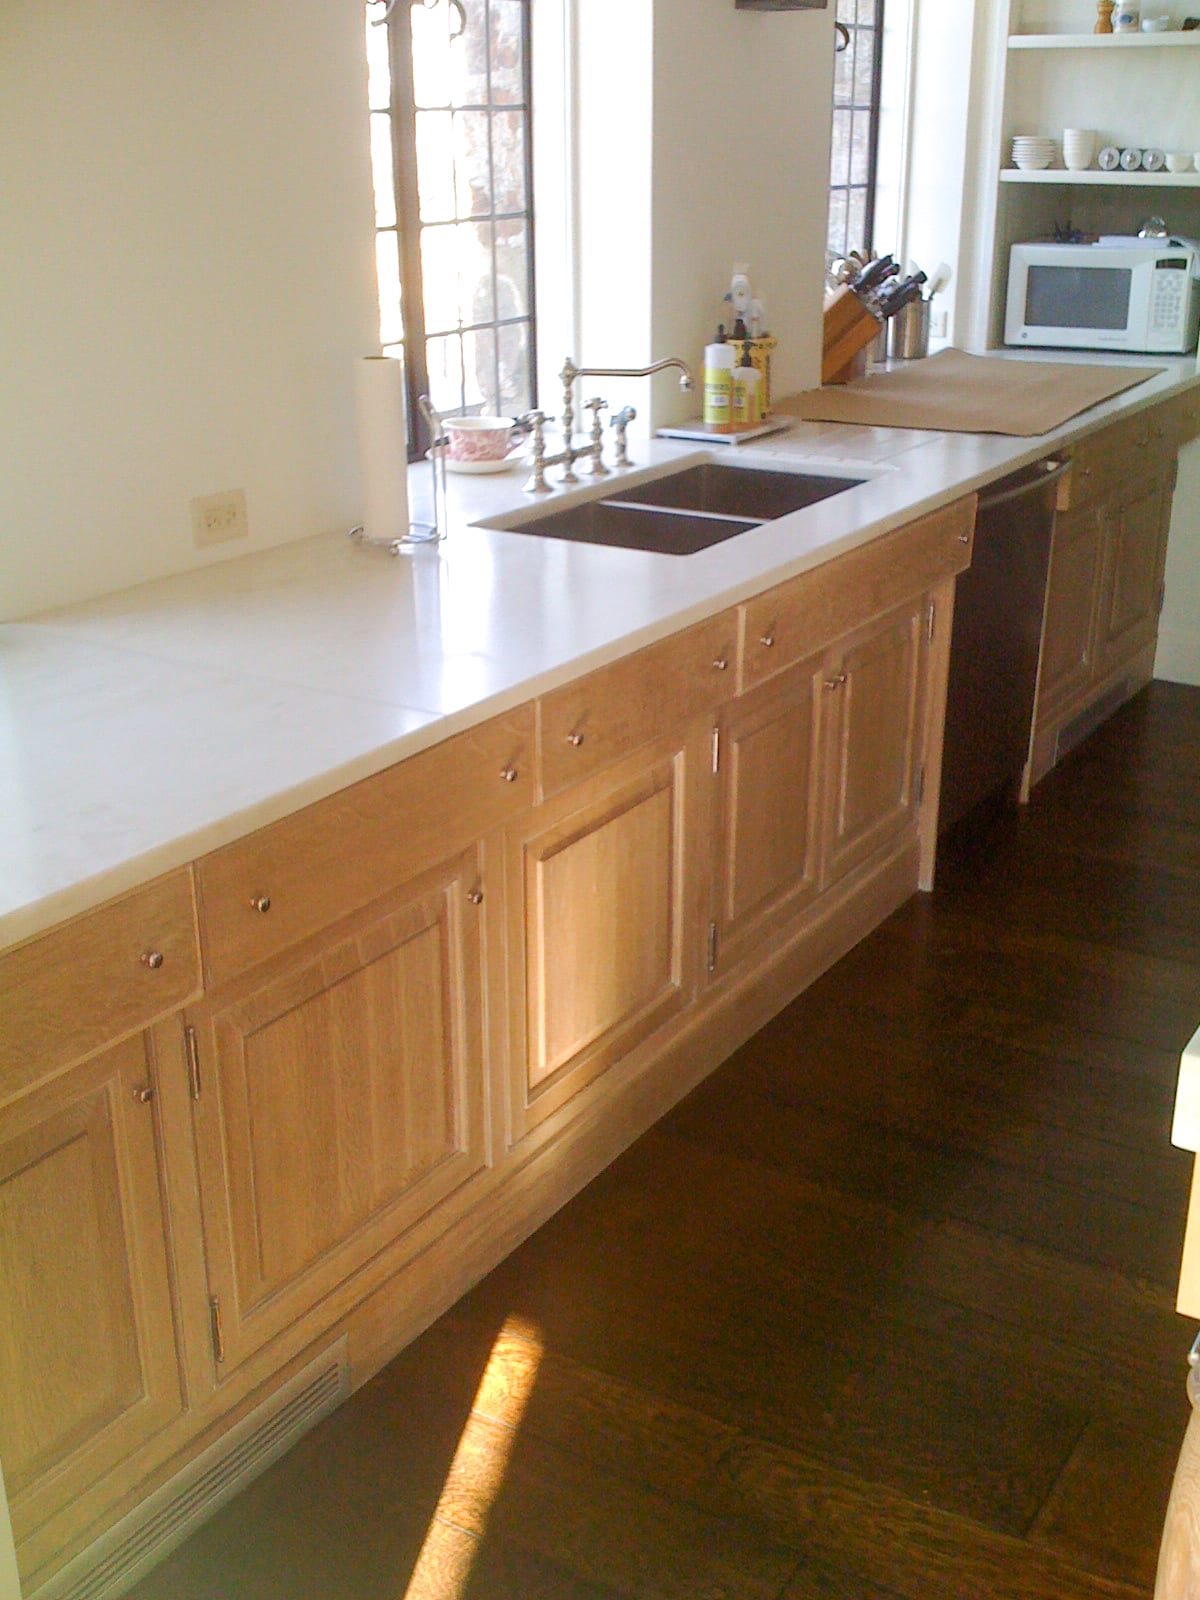 Wood Cabinets with White Marble Countertops